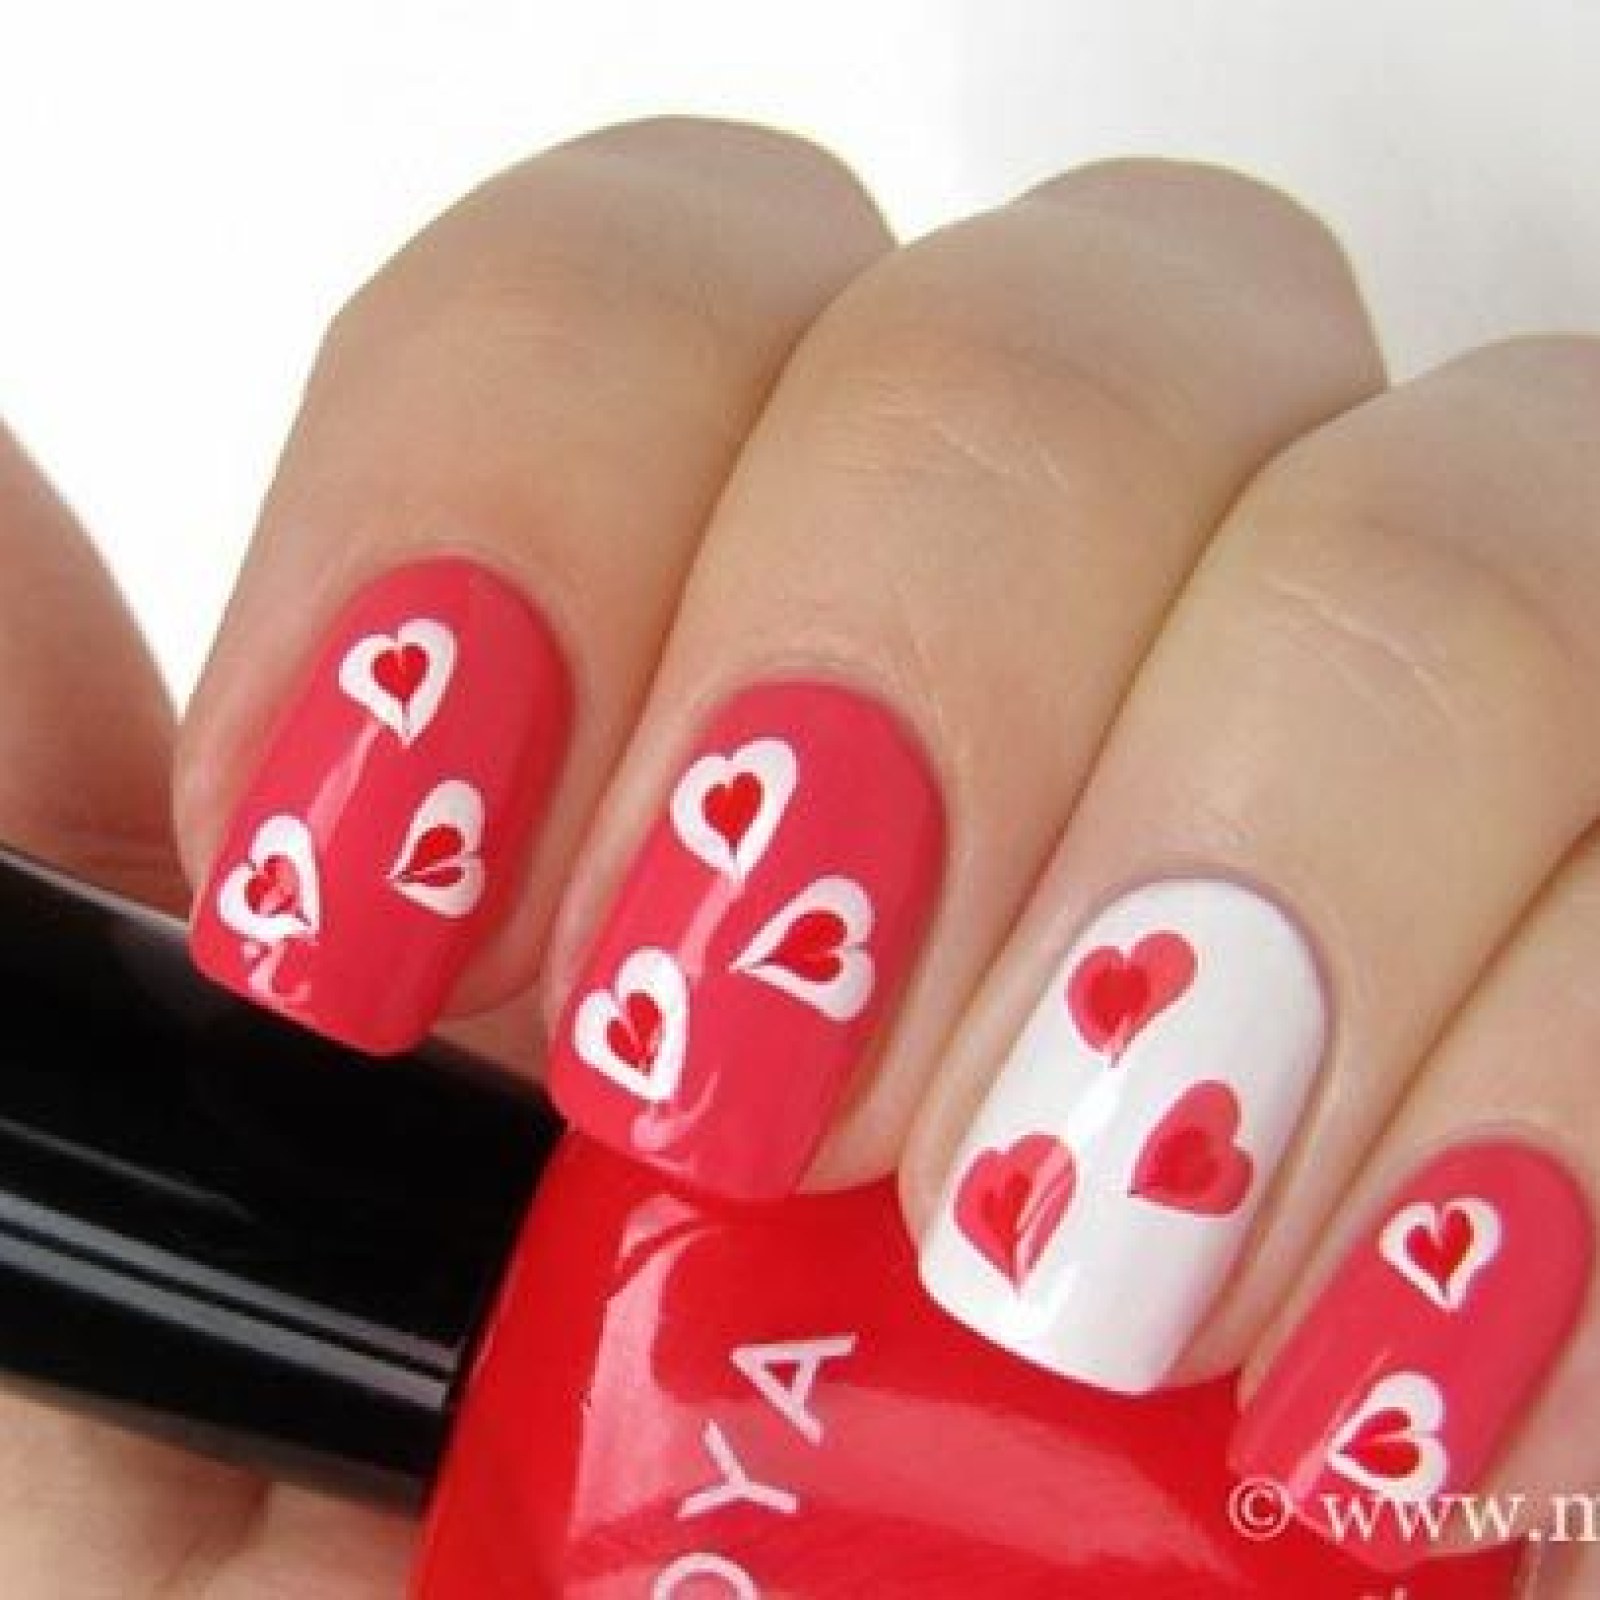 How To Get Perfect Valentine's Day Nails: Art Designs, Polish Color Trends,  Safety Tips, When And Where To Go, And Easy DIY Ideas